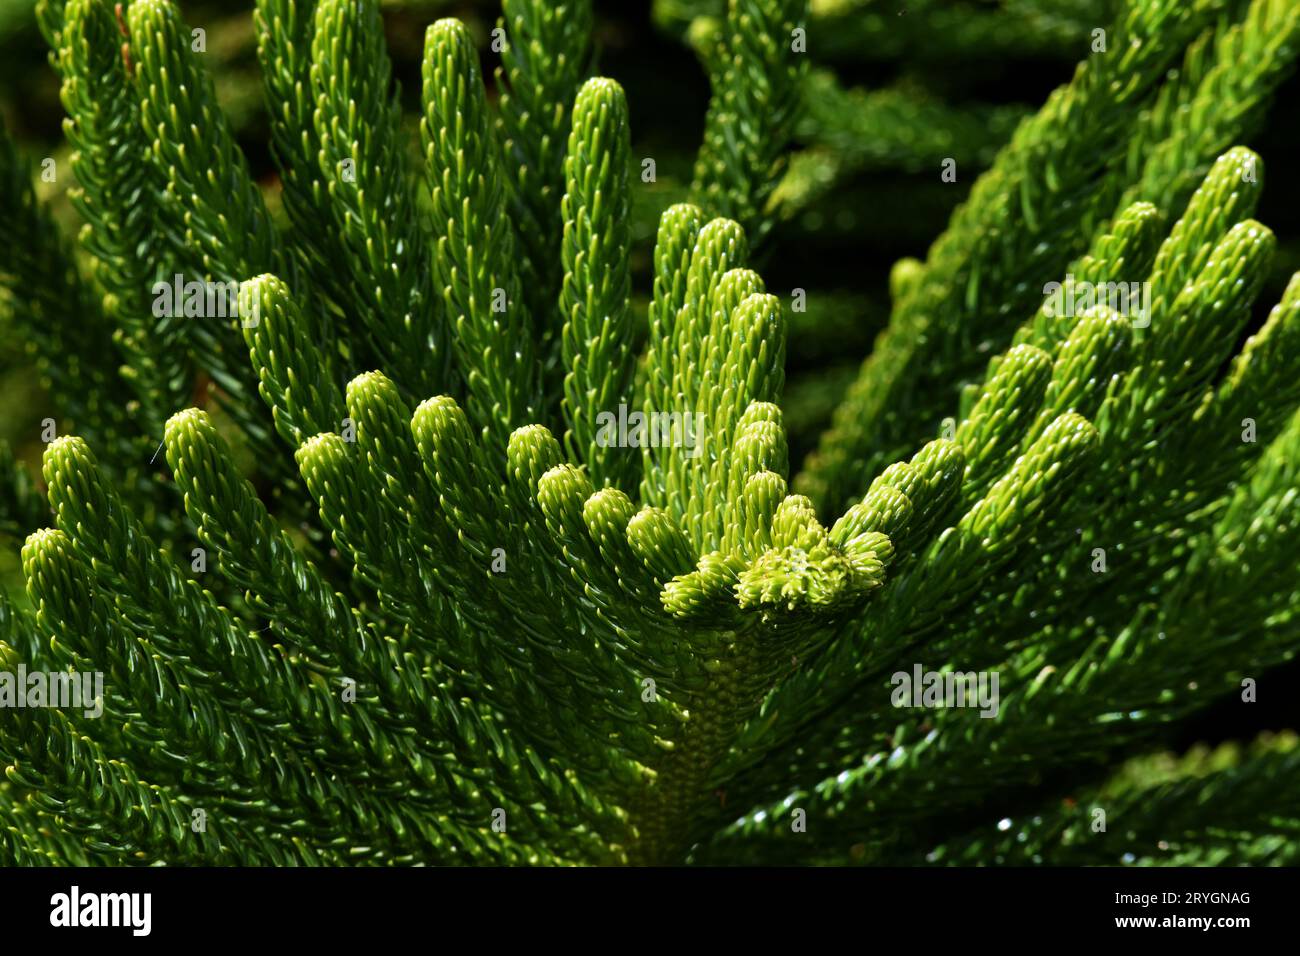 Macro photography of the leaves of a Norfolk pine (Araucaria heterophylla or A. excelsa). Stock Photo